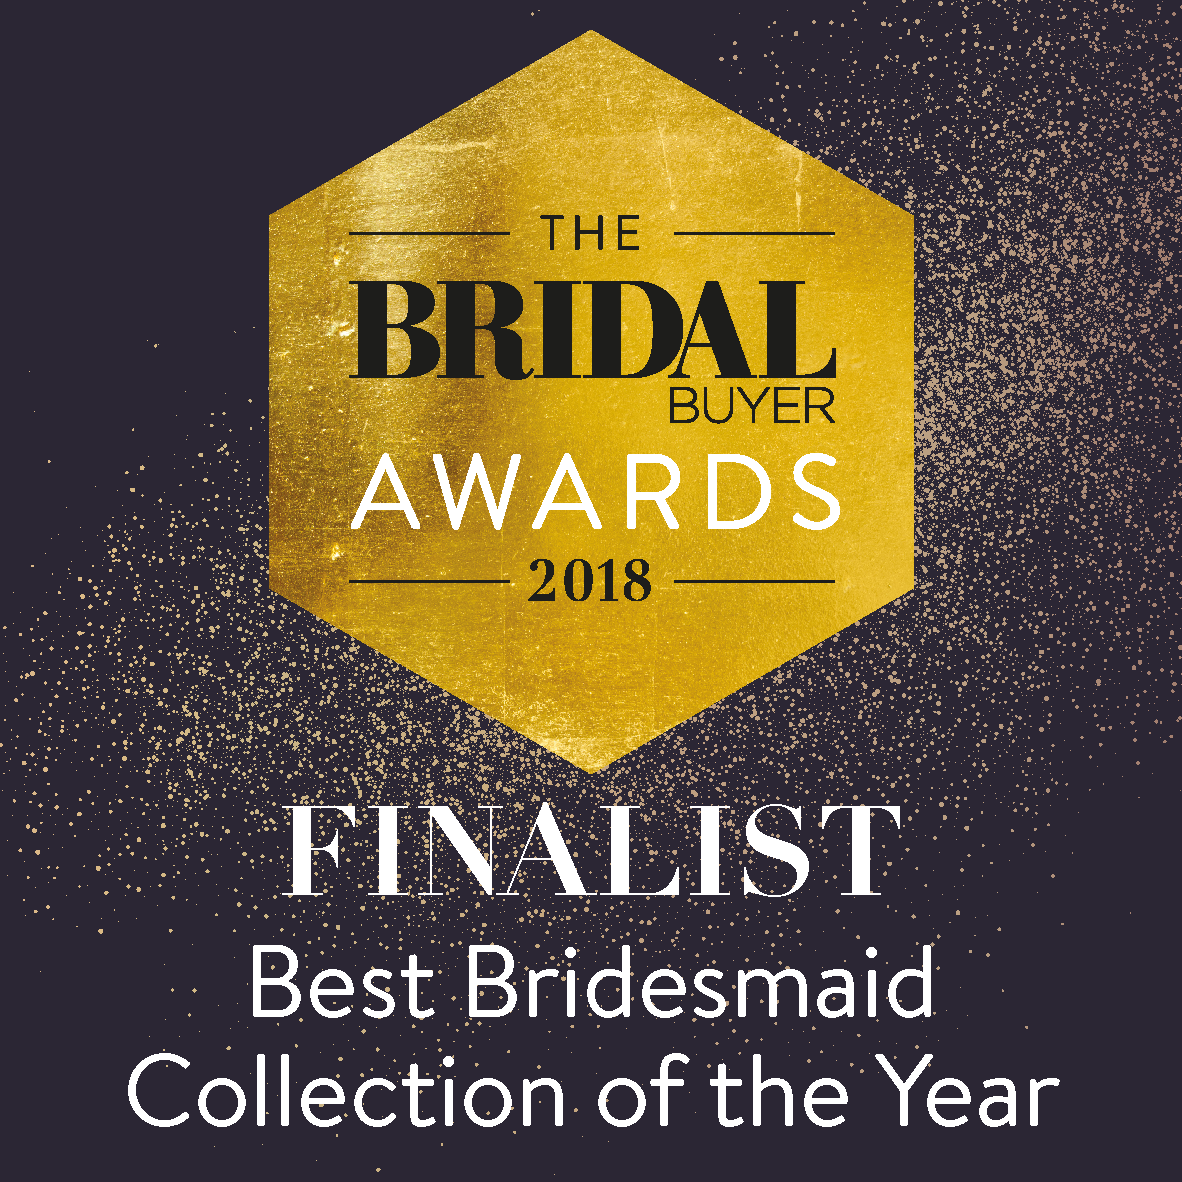 Finalist Best Bridesmaid Collection of the Year